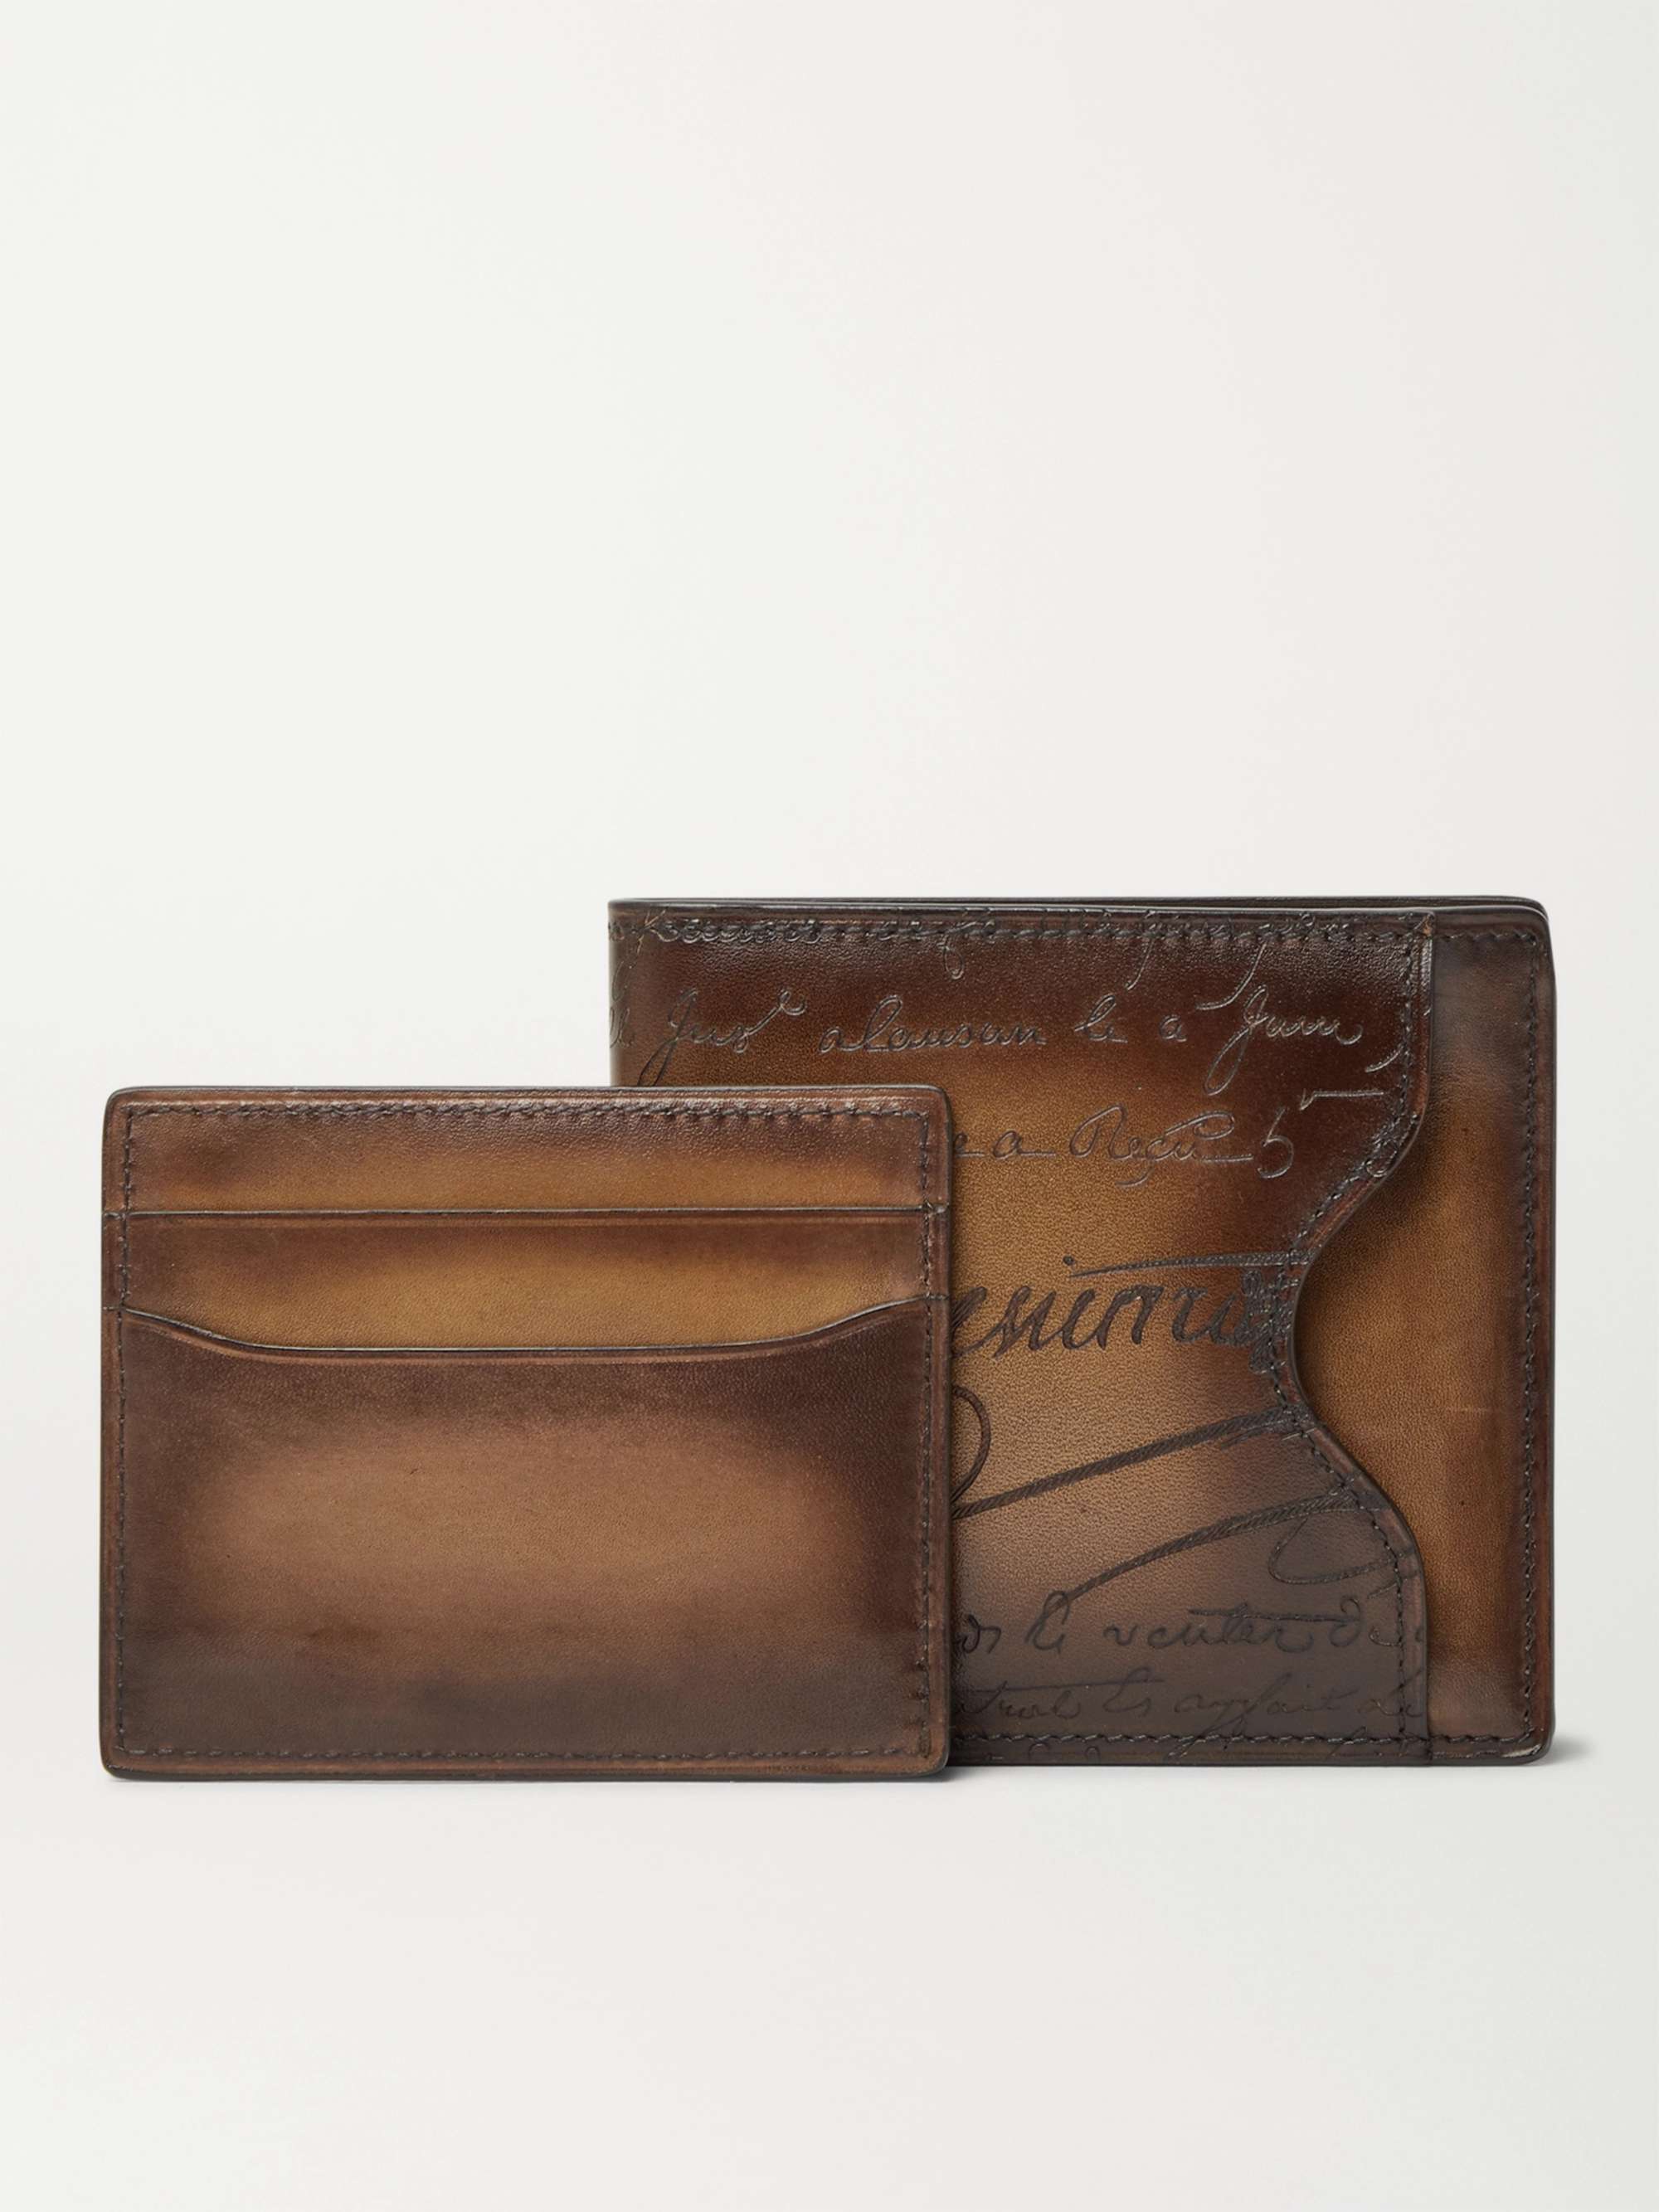 BERLUTI Scritto Leather Billfold Wallet with Cardholder